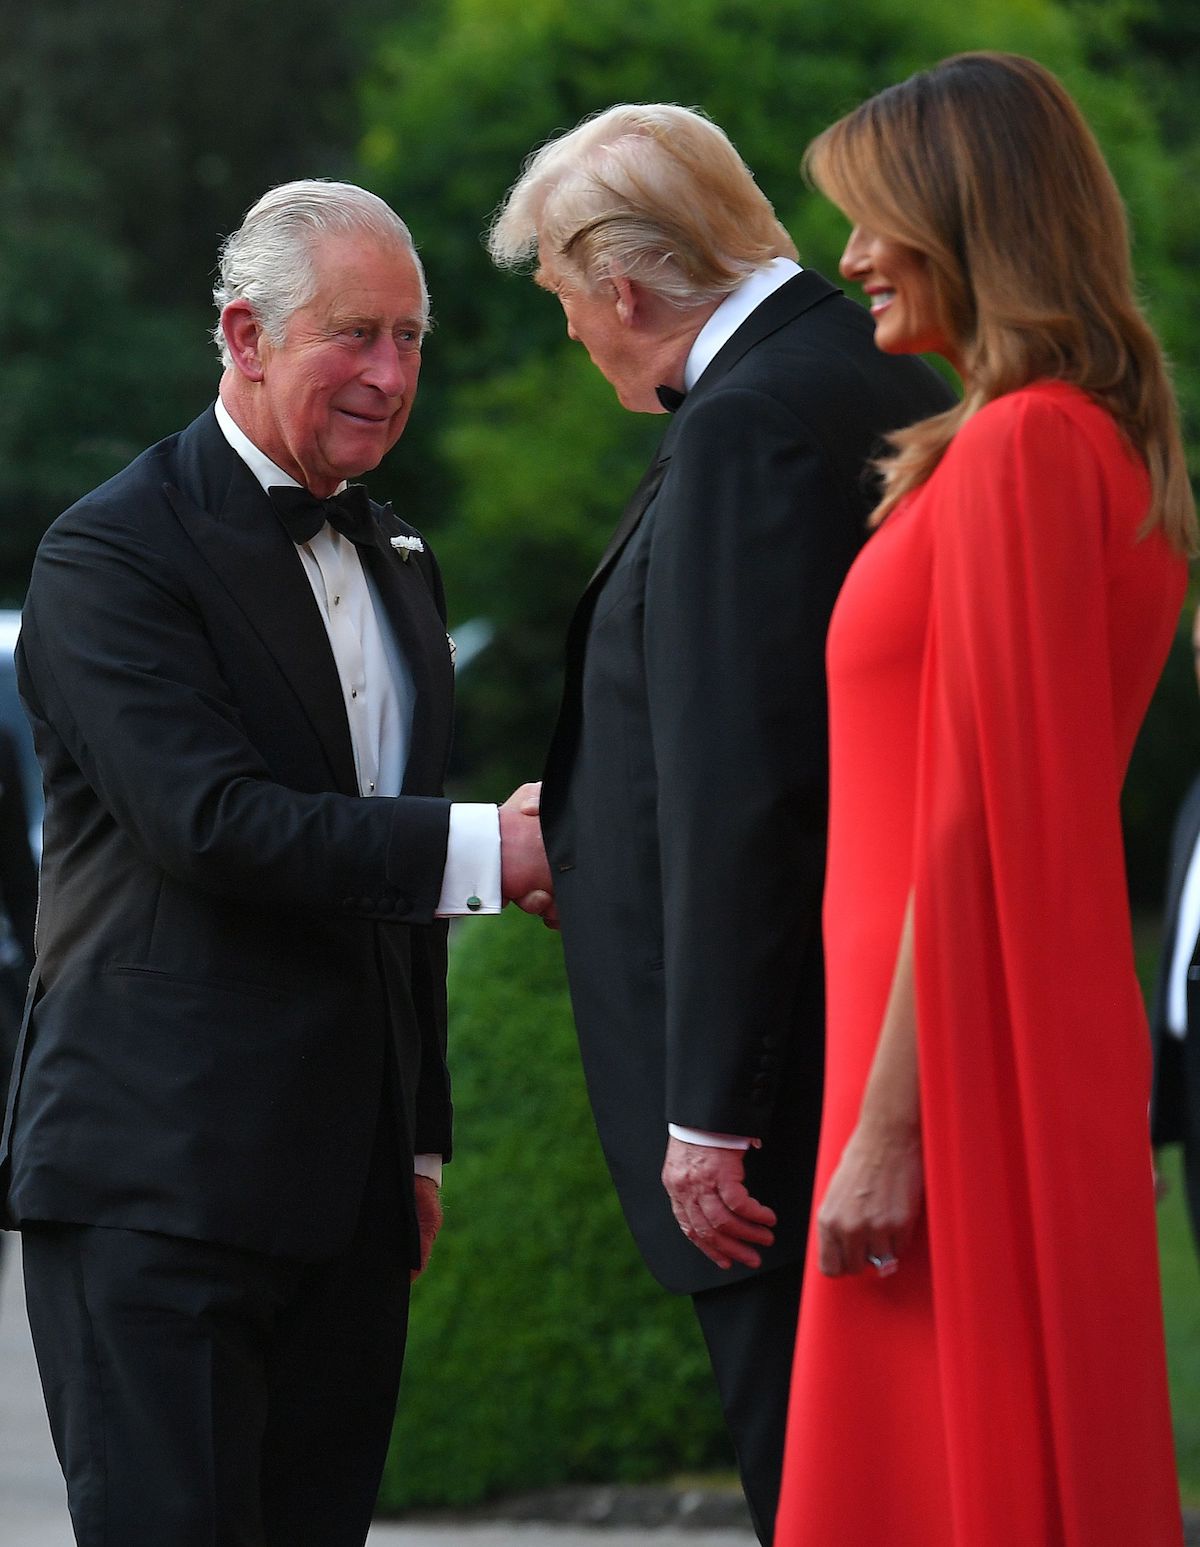 US President Donald Trump (C) and US First Lady Melania Trump (R) greet Britain's Prince Charles, Prince of Wales ahead of a dinner at Winfield House, the residence of the US Ambassador, where US President Trump is staying whilst in London, on June 4, 2019... (Photo credit: MANDEL NGAN/AFP/Getty Images)